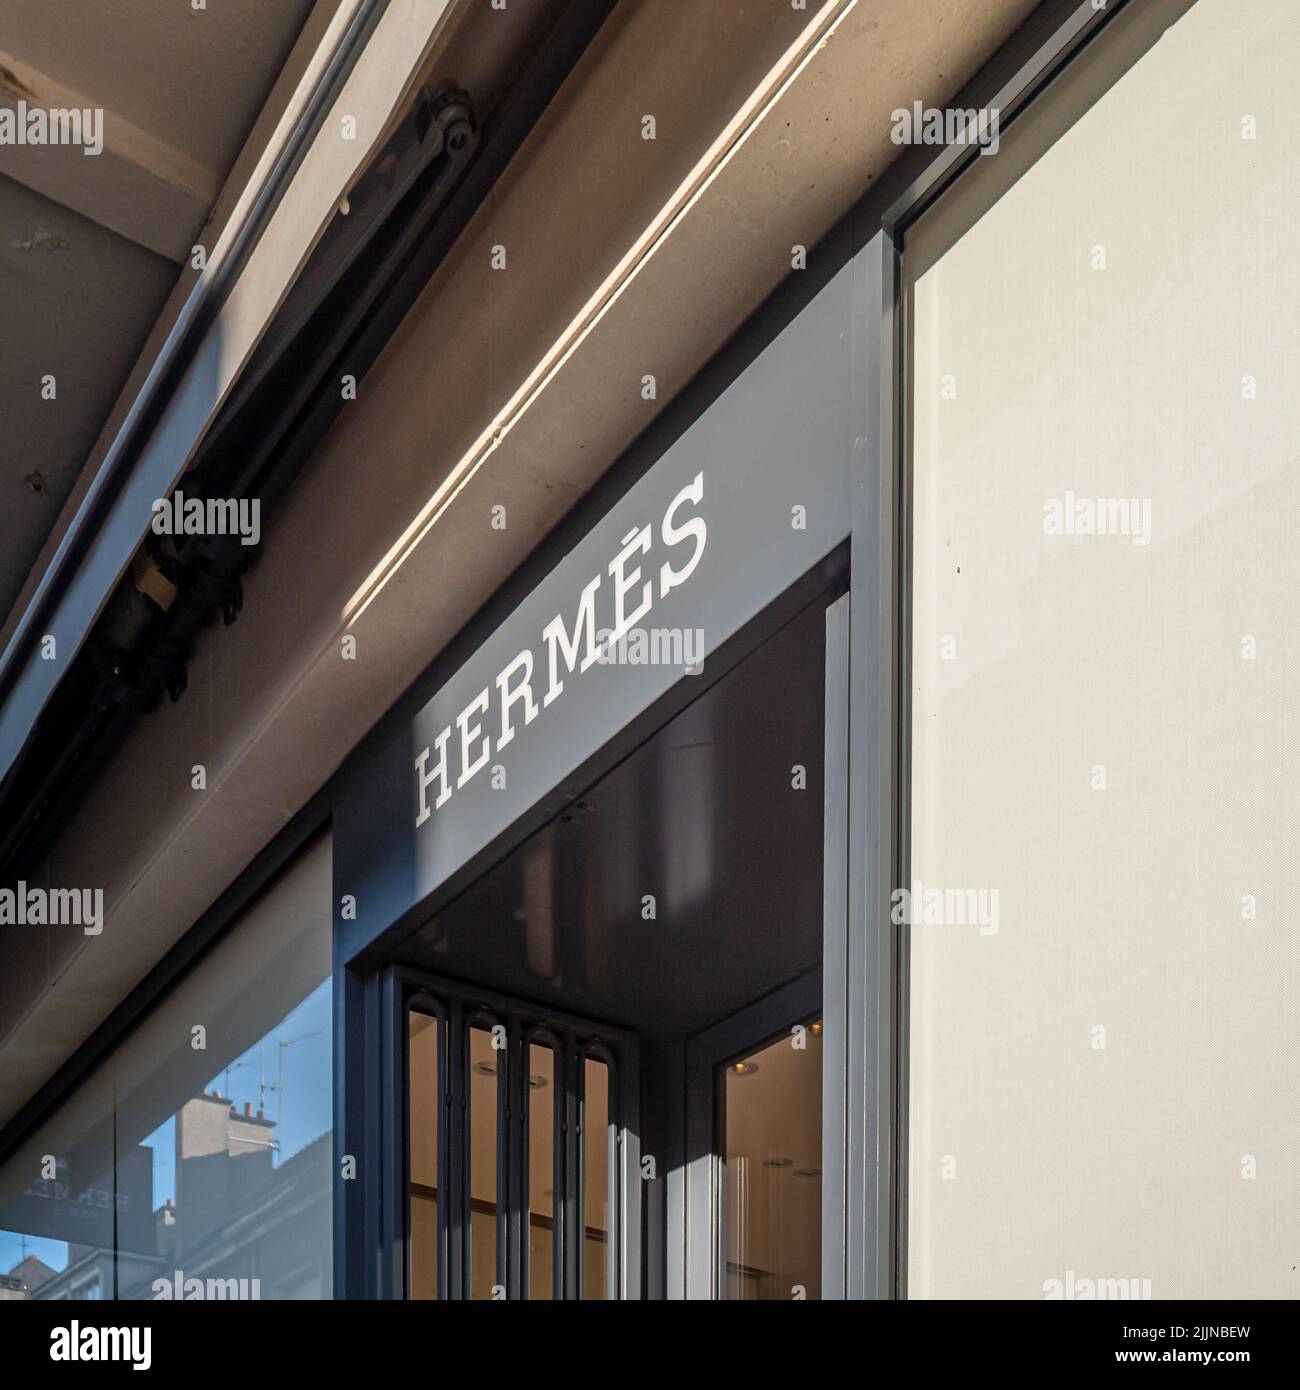 Hermes shop window hi-res stock photography and images - Alamy